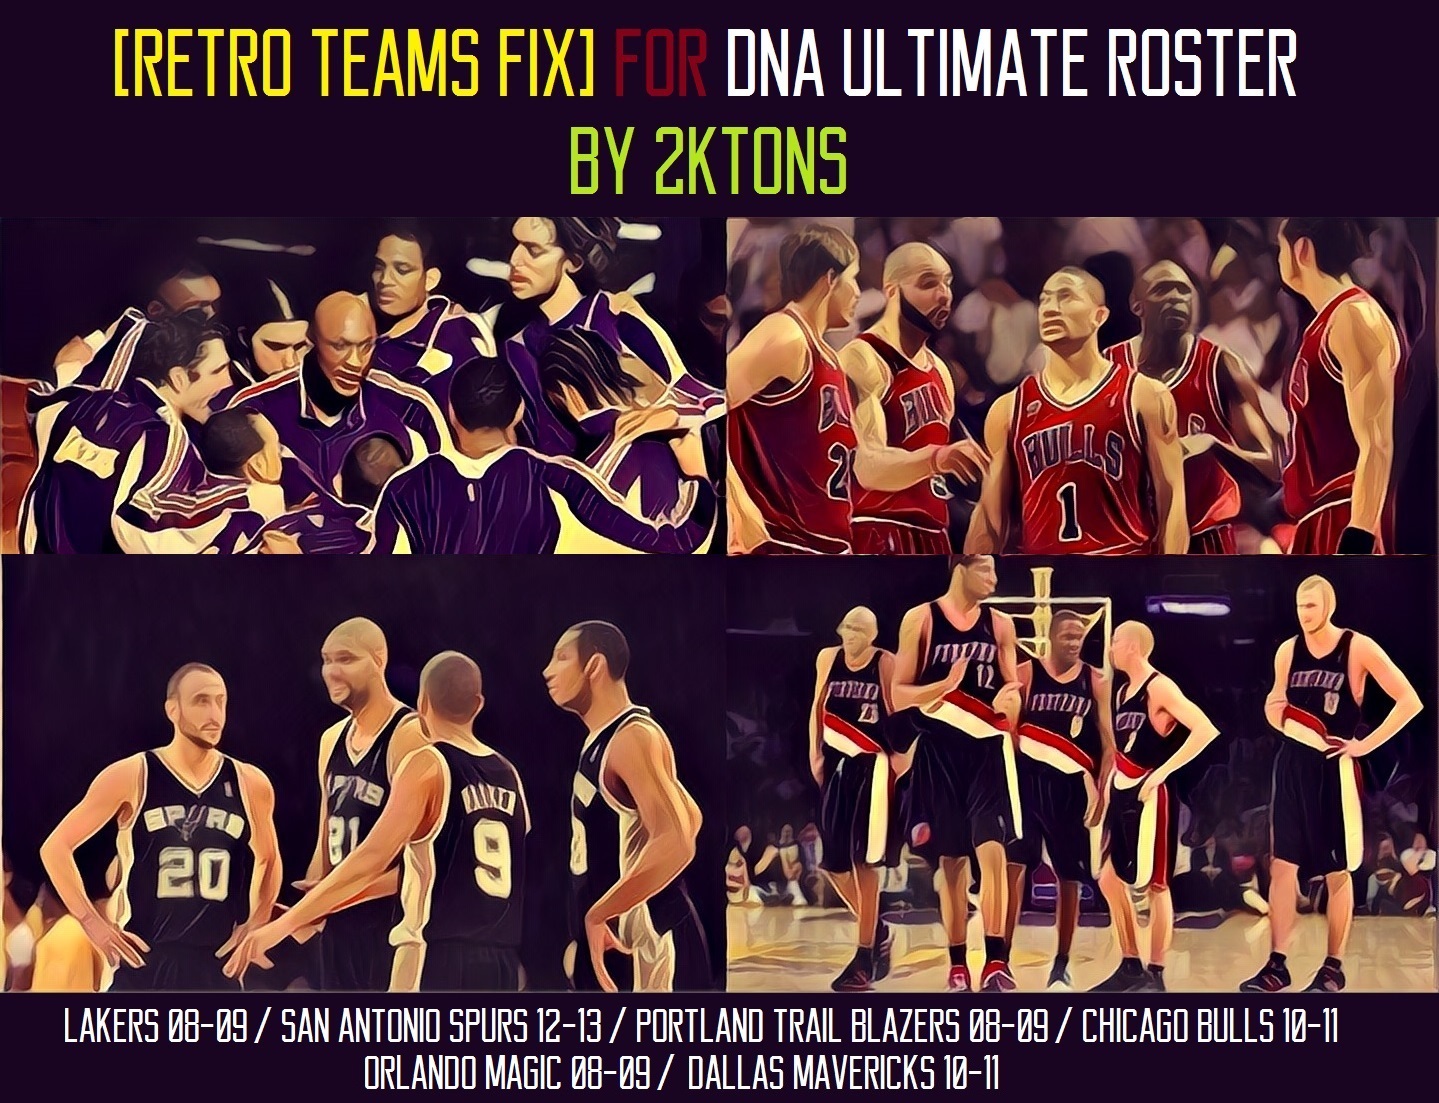 NBA 2K17 DNA Ultimate Roster [RETRO TEAMS FIX] by 2KTons1439 x 1103